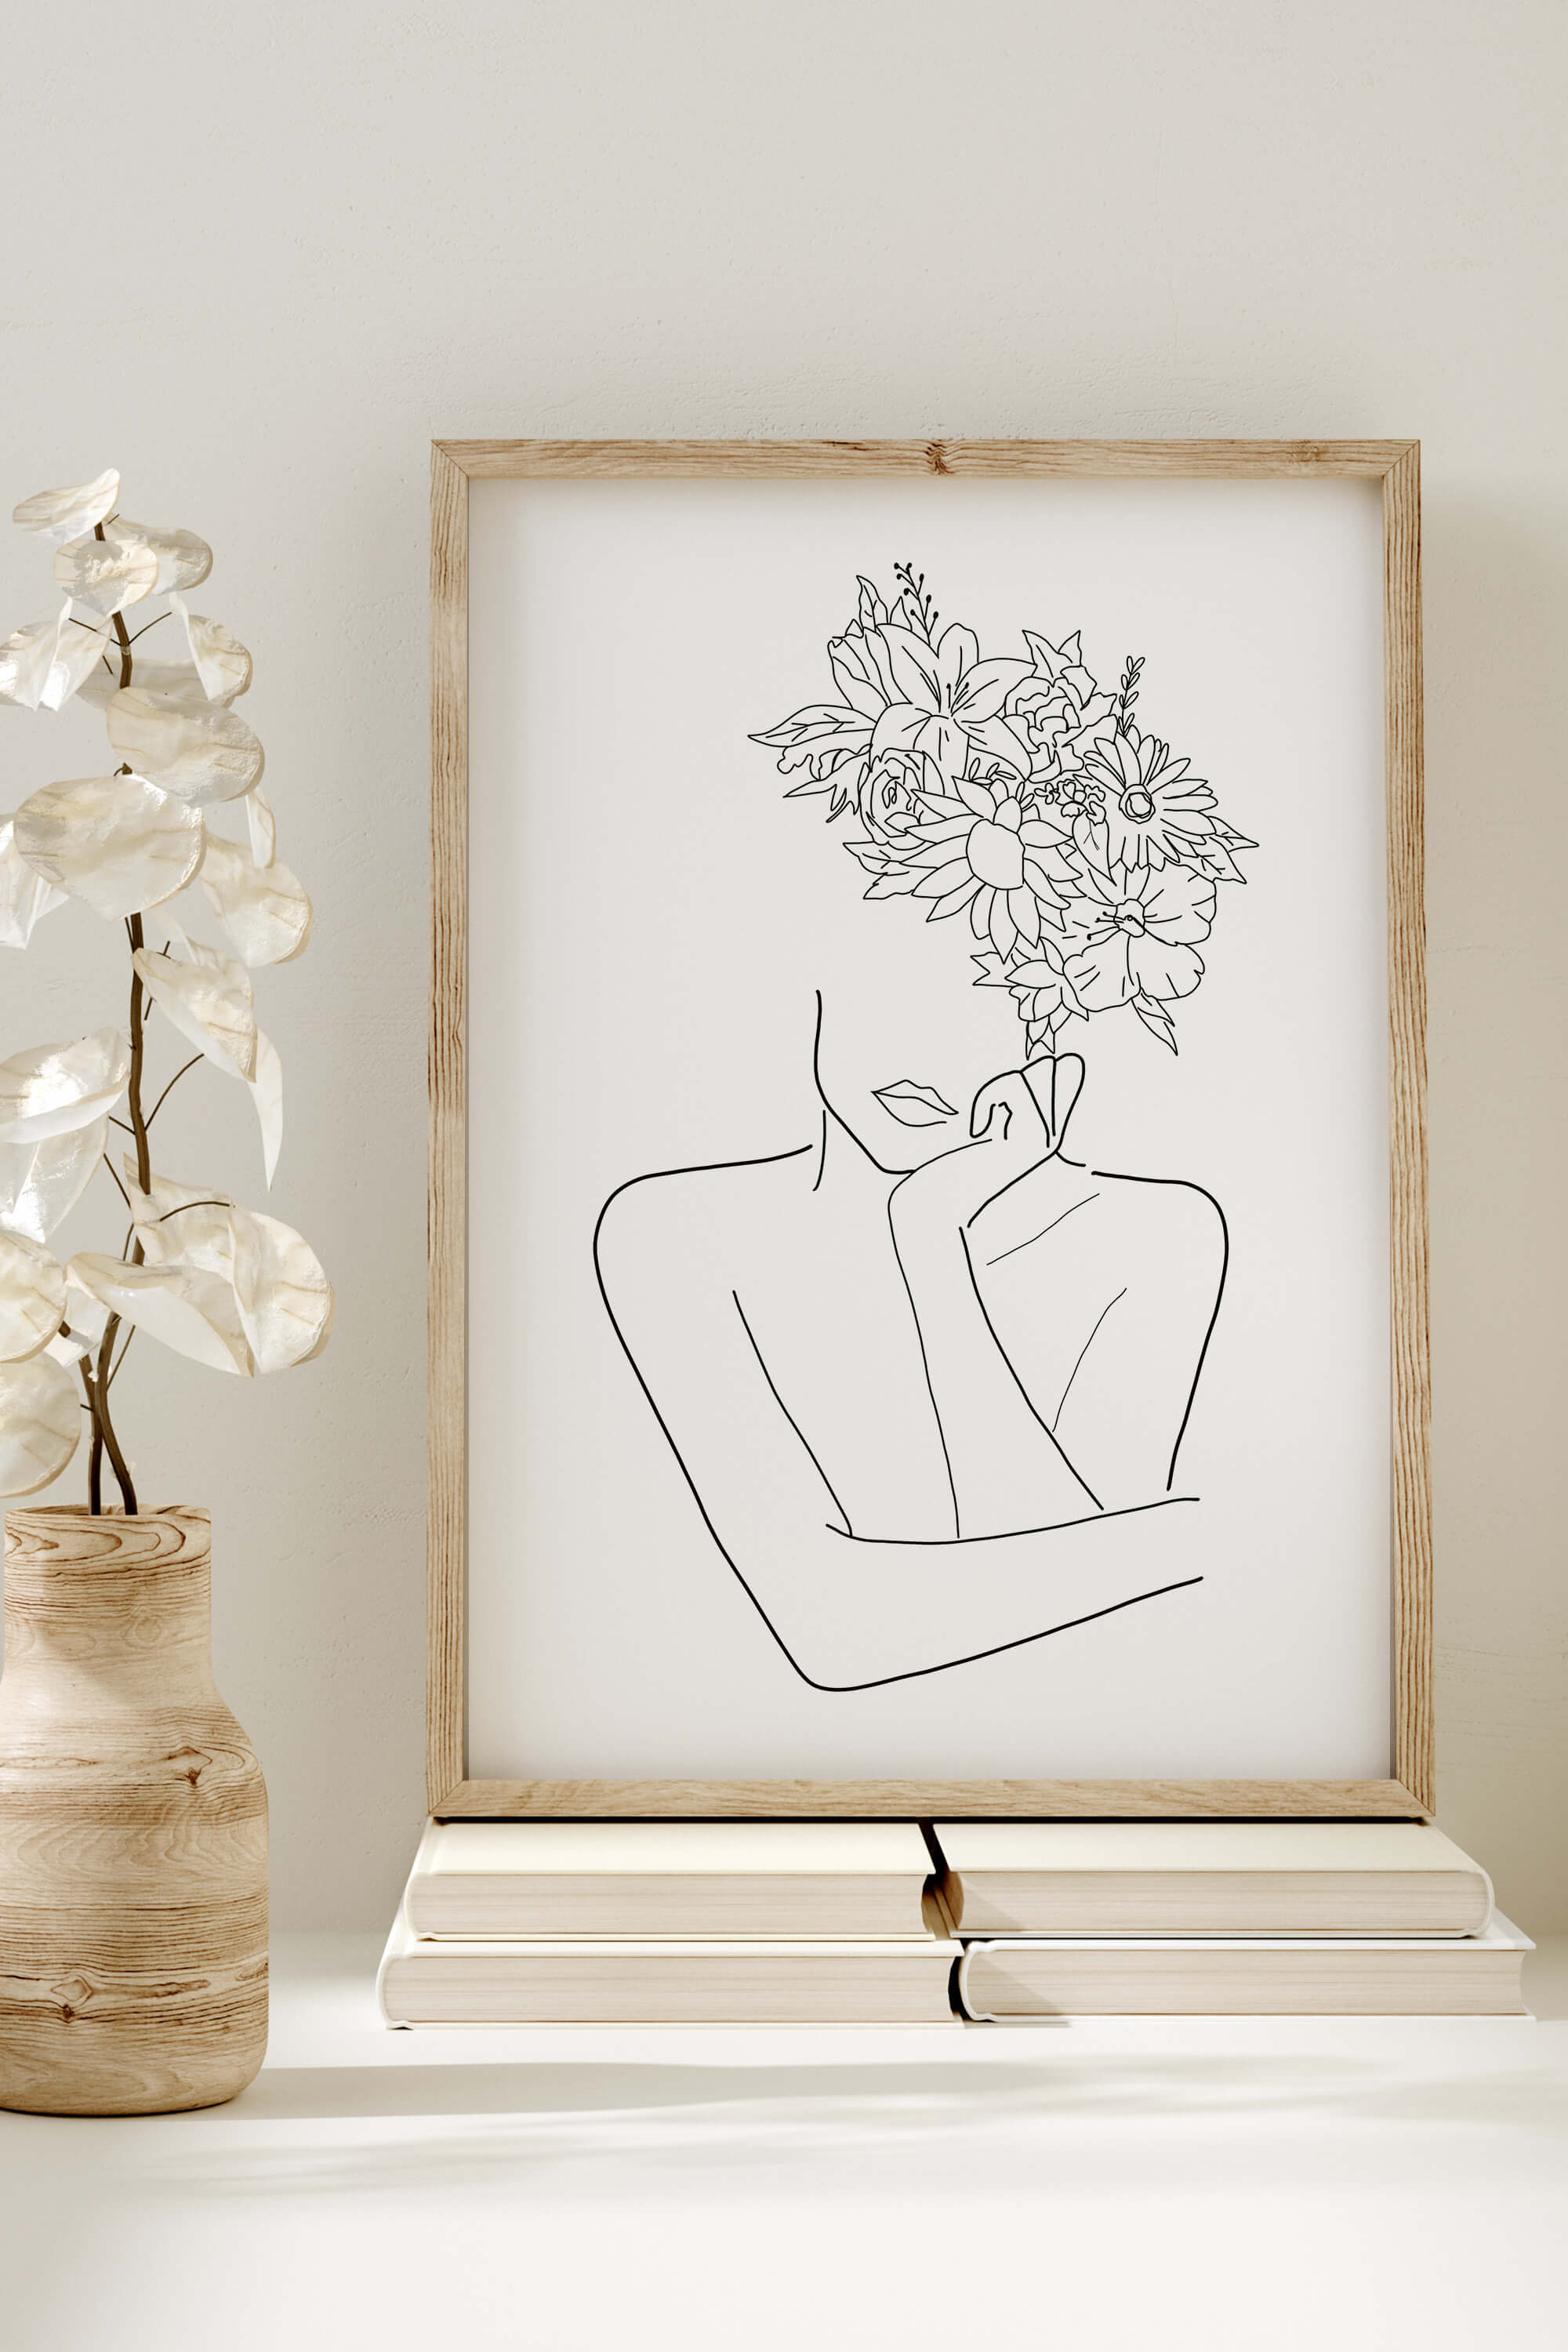 Black and white poster featuring a consciousness-inspired art print. The monochromatic aesthetic transforms living spaces into a sanctuary of beauty, providing an inspiring and harmonious addition to your home decor.